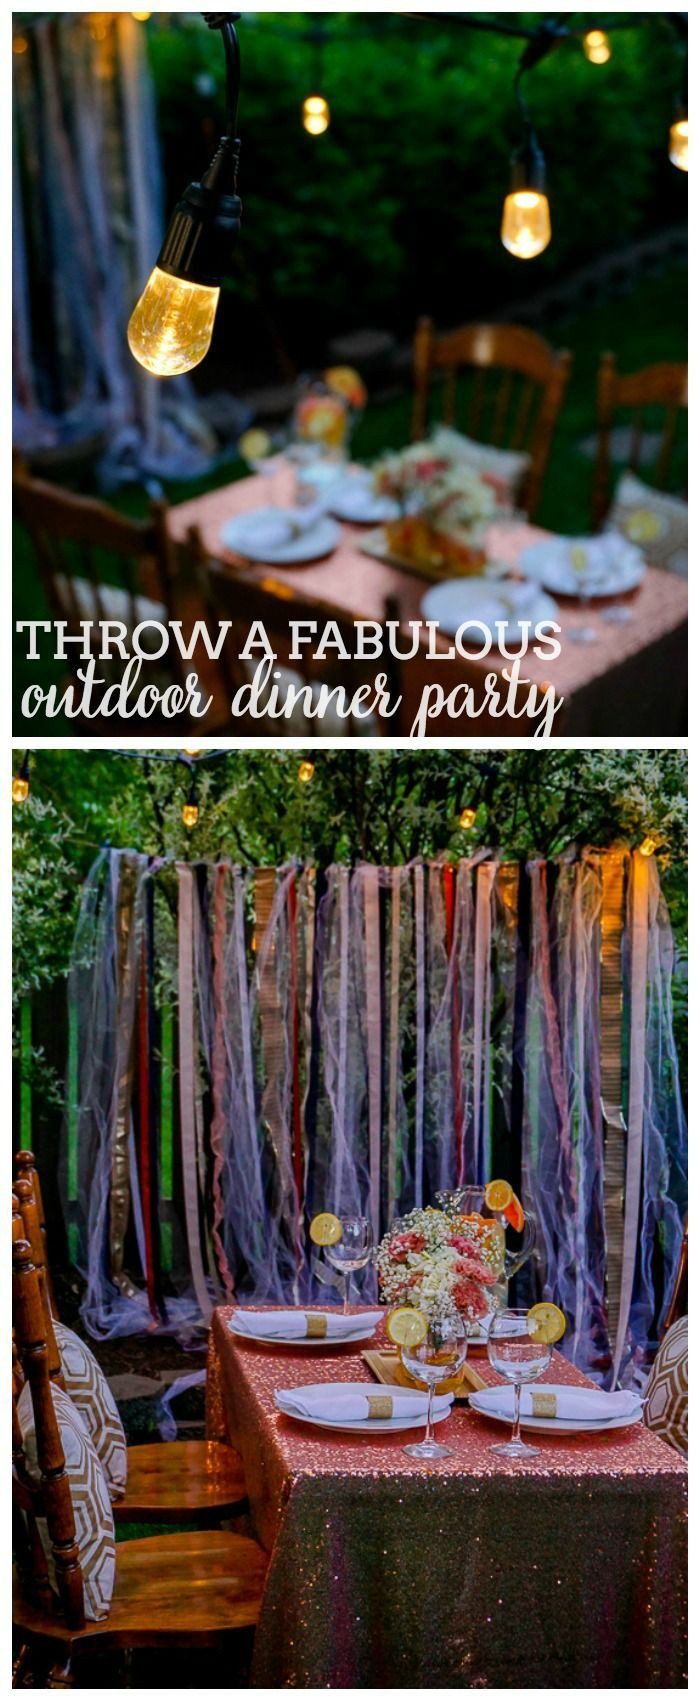 Dinner Party Game Ideas
 Best 25 Dinner party games ideas on Pinterest